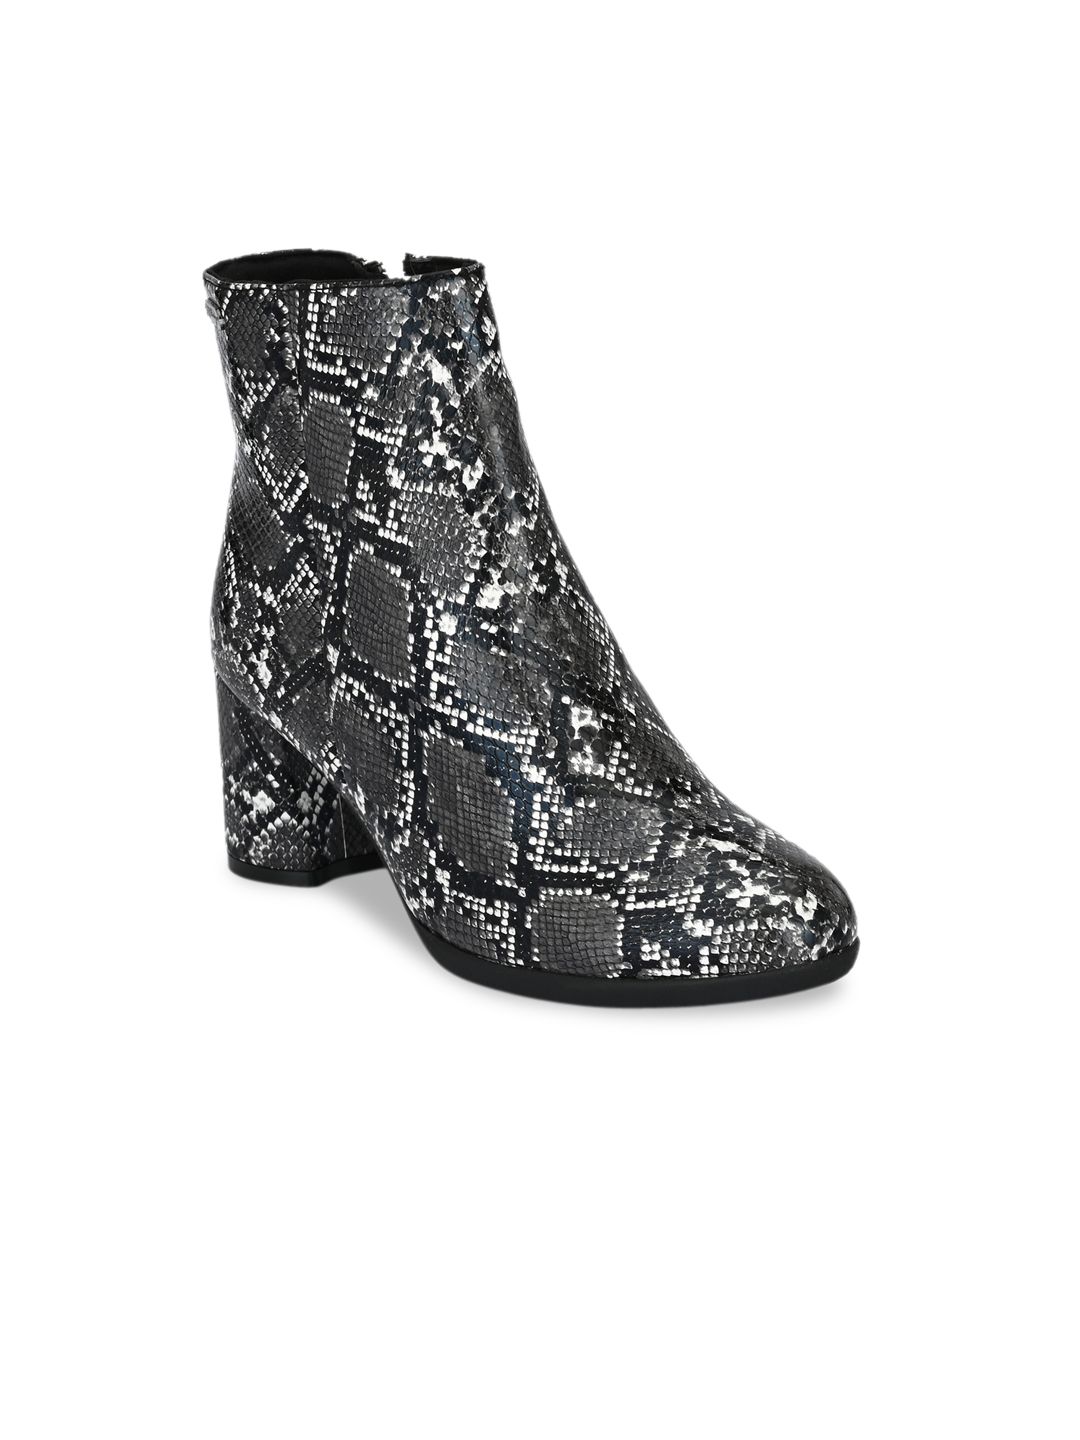 Delize Black & Green Animal Textured Block Heeled Chelsea Boots Price in India